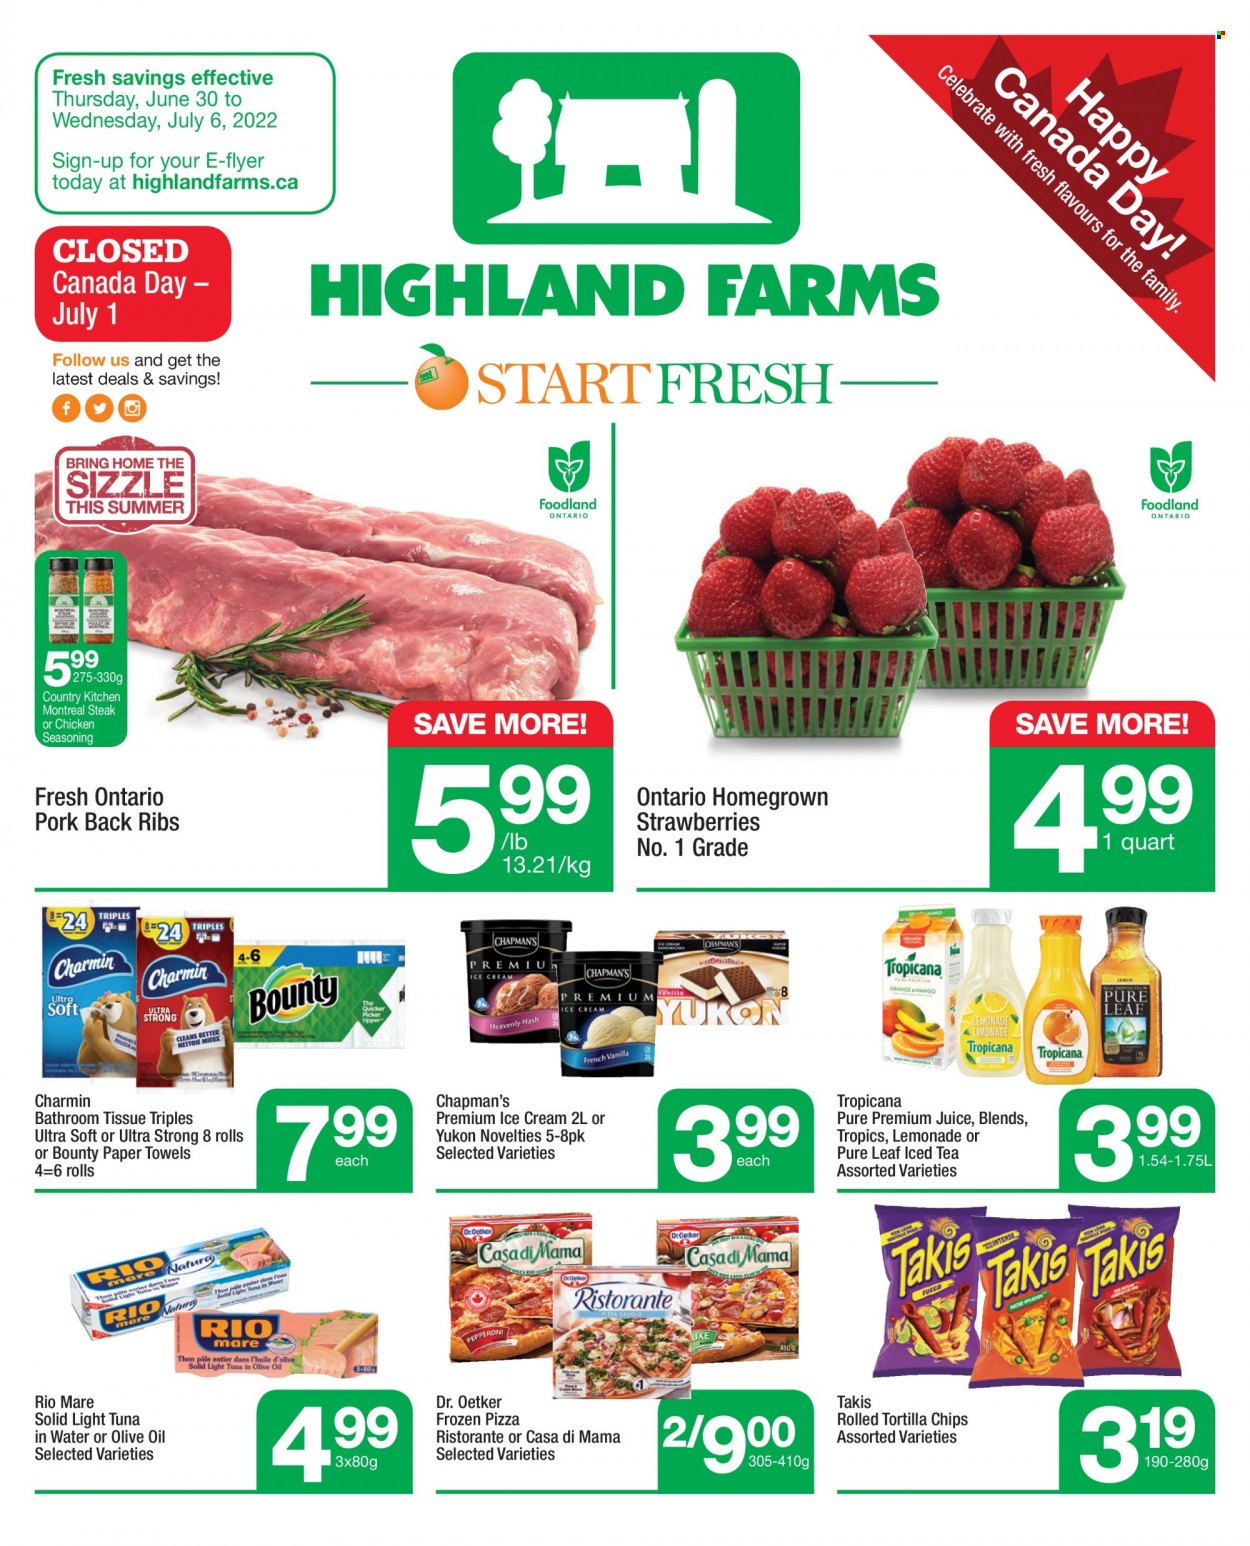 thumbnail - Highland Farms Flyer - June 30, 2022 - July 06, 2022 - Sales products - strawberries, tuna, pizza, Dr. Oetker, ice cream, Bounty, tortilla chips, tuna in water, light tuna, spice, olive oil, oil, lemonade, juice, ice tea, Pure Leaf, pork meat, pork ribs, pork back ribs, steak. Page 1.